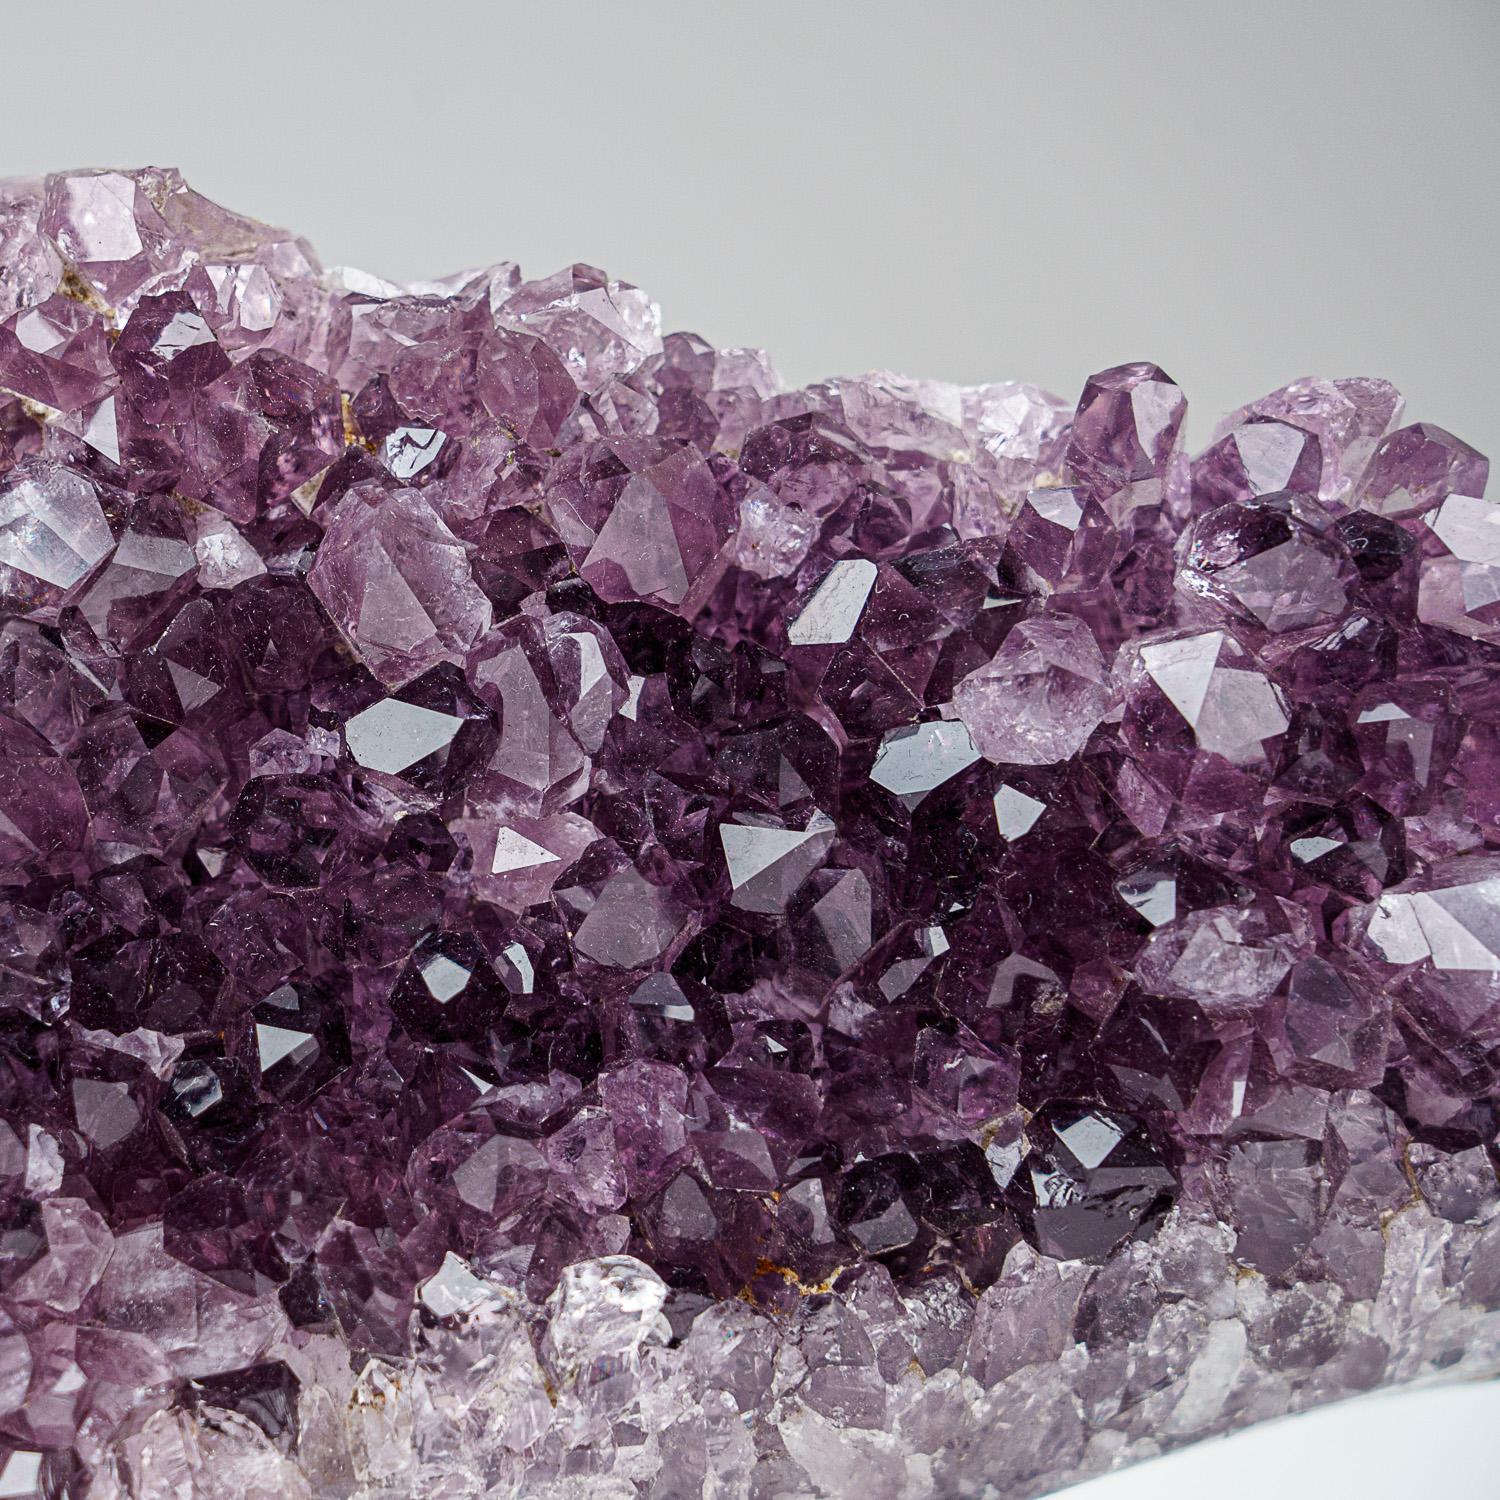 AAA Top Quality natural formation of gem amethyst variety quartz cluster with lustrous fully terminated crystals with highly reflective faces and deep transparent to translucent grape color.

Amethyst opens and activates the Crown Chakra as well,